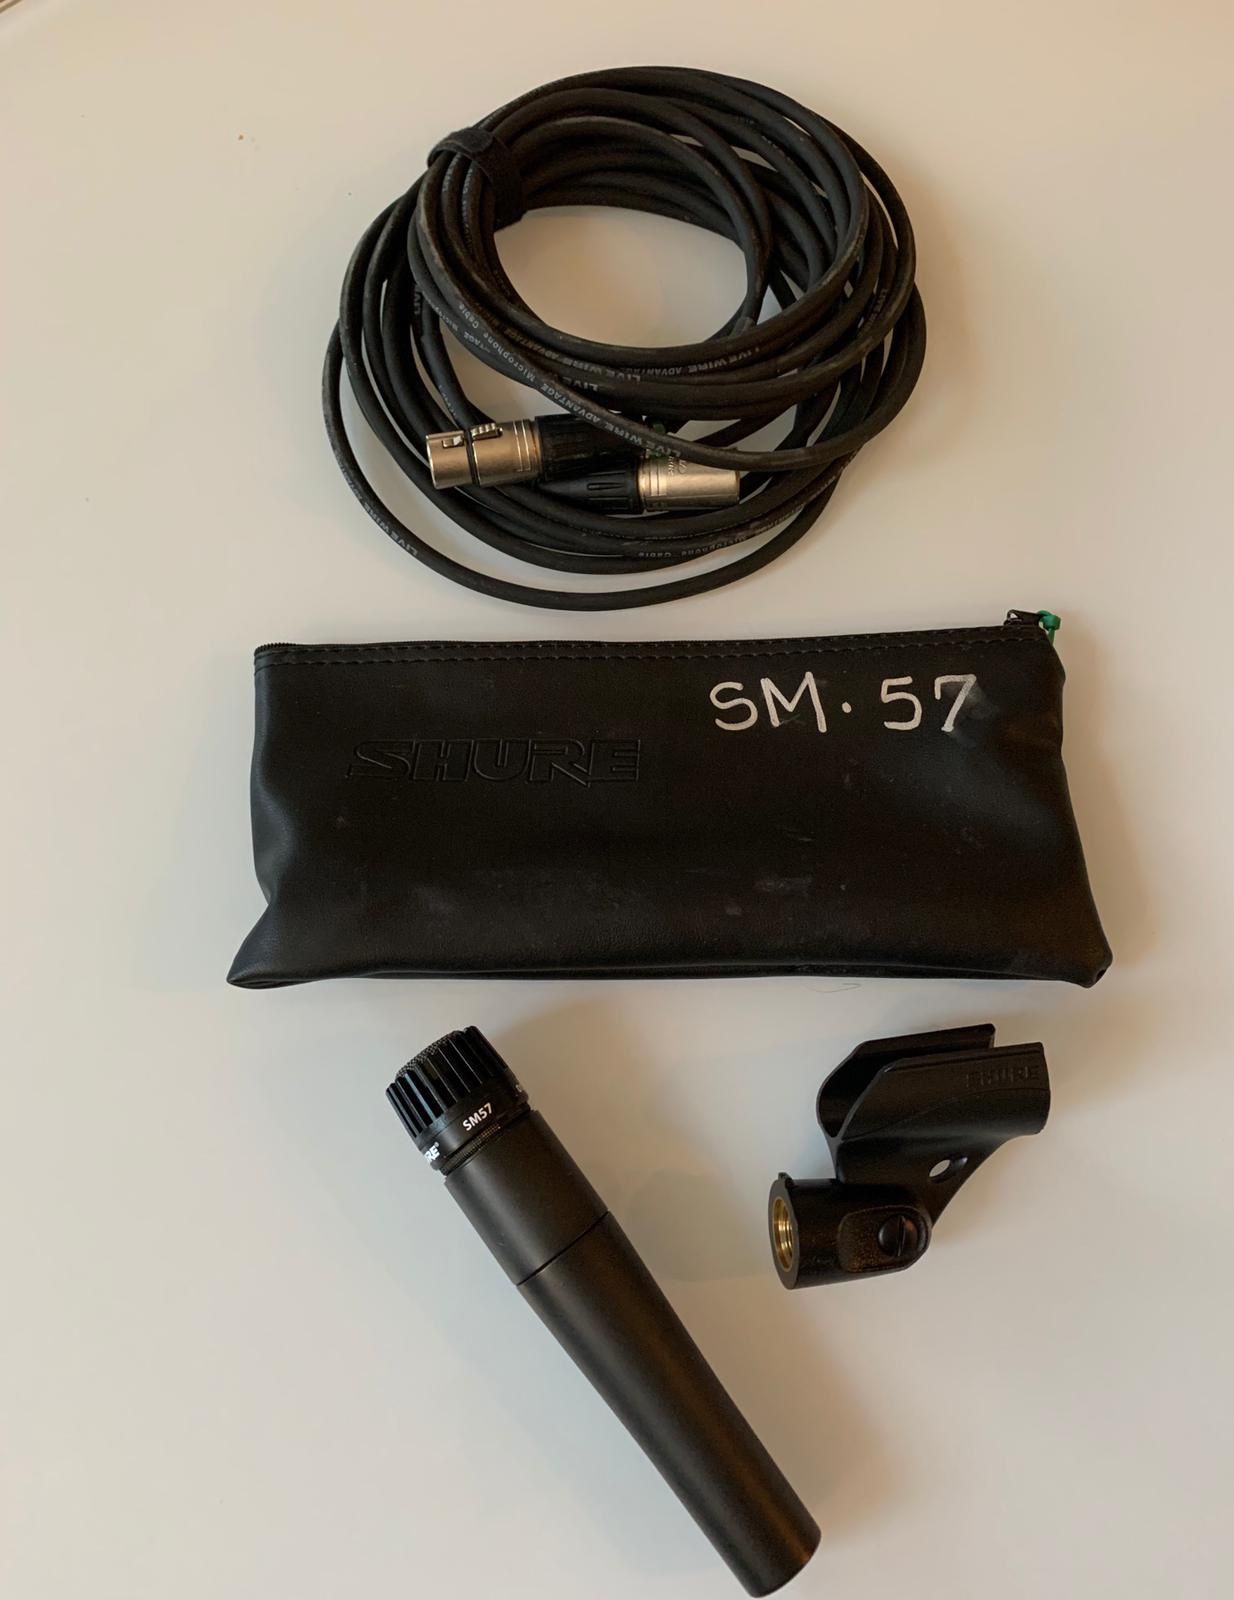 Shure SM57 Cardioid Dynamic Instrument Microphone with cable (Used) $70.00